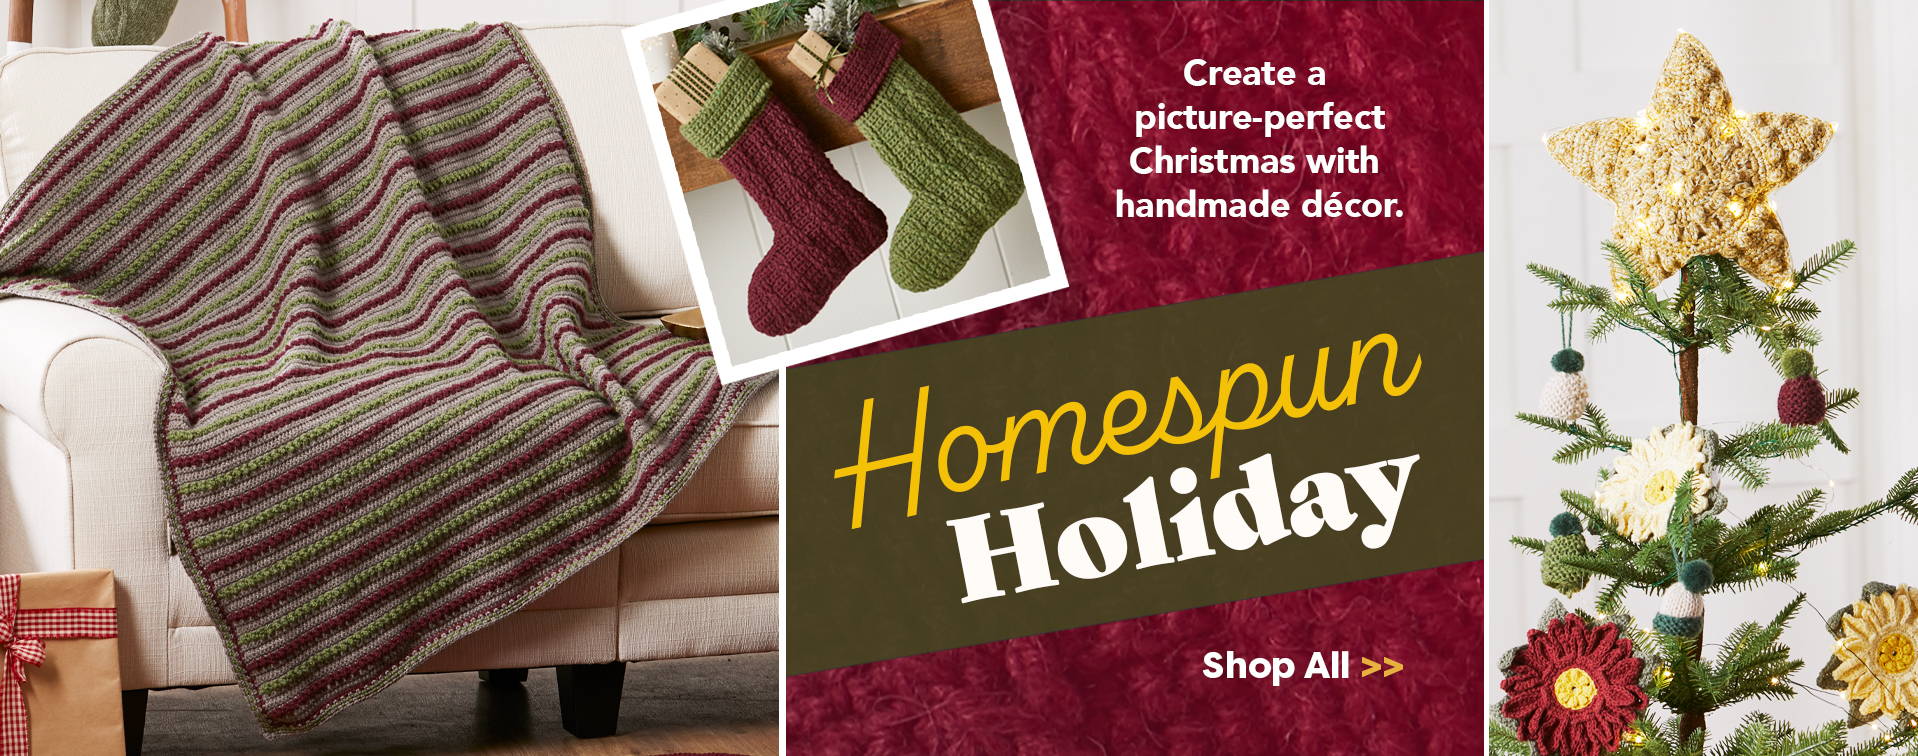 Create a picture-perfect Christmas with handmade knit & crochet decor.